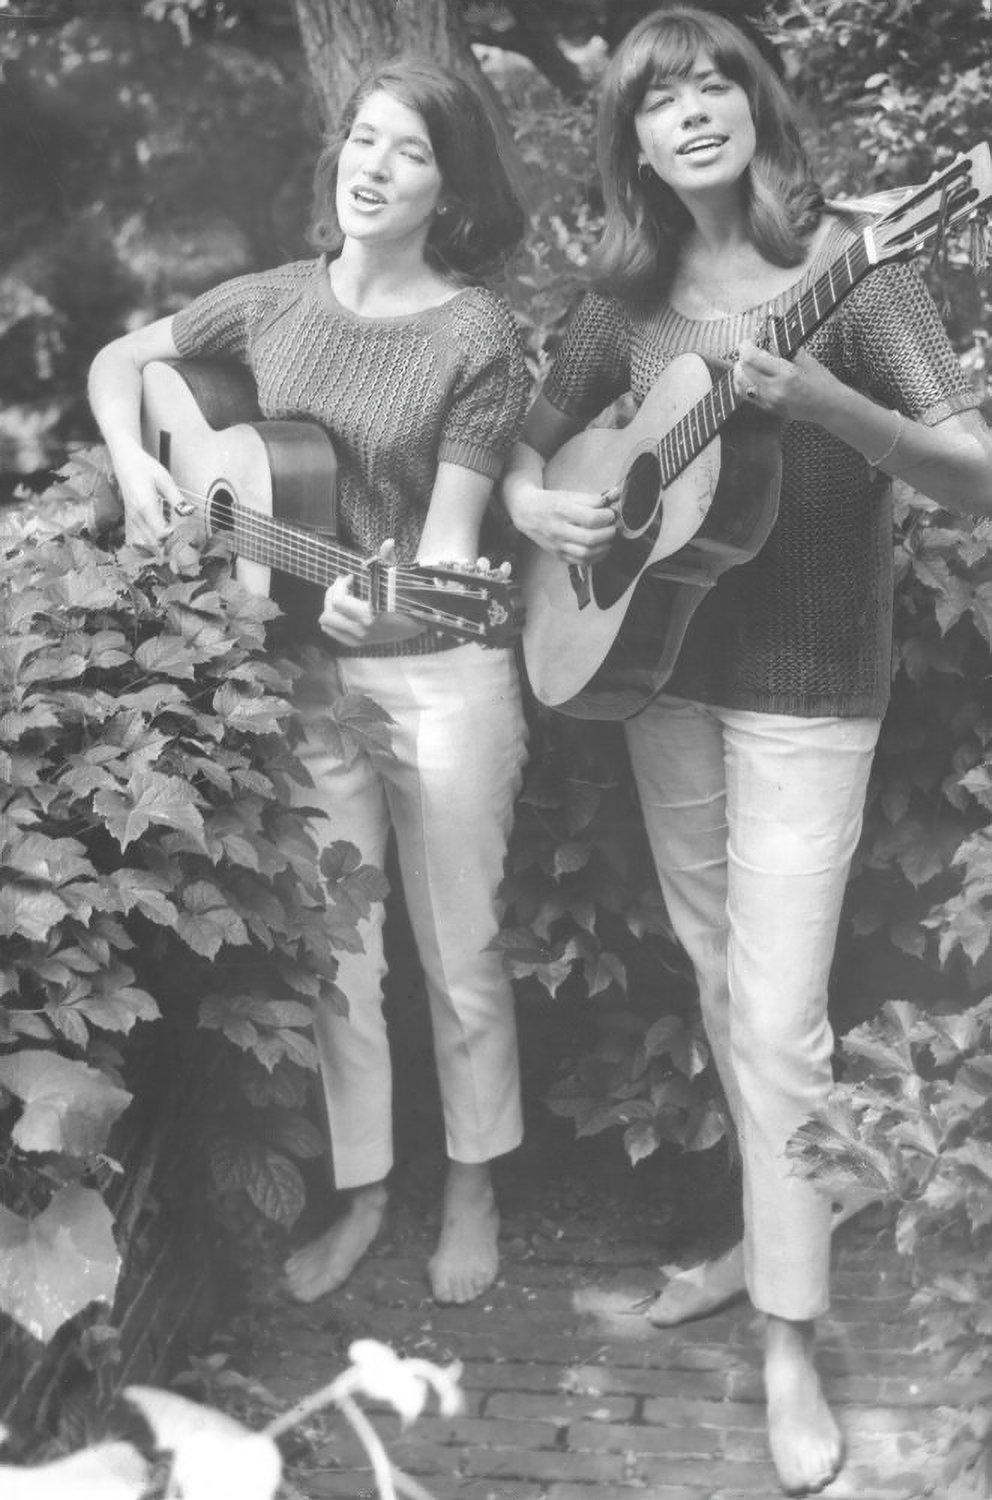 Carly Simon, right, and sister Lucy play the guitar in a 1964 photograph taken by their brother, Peter, who at the time freelanced for The Riverdale Press. He continued taking pictures the rest of his life — primarily in Martha’s Vineyard. He died Nov. 18 at 71.